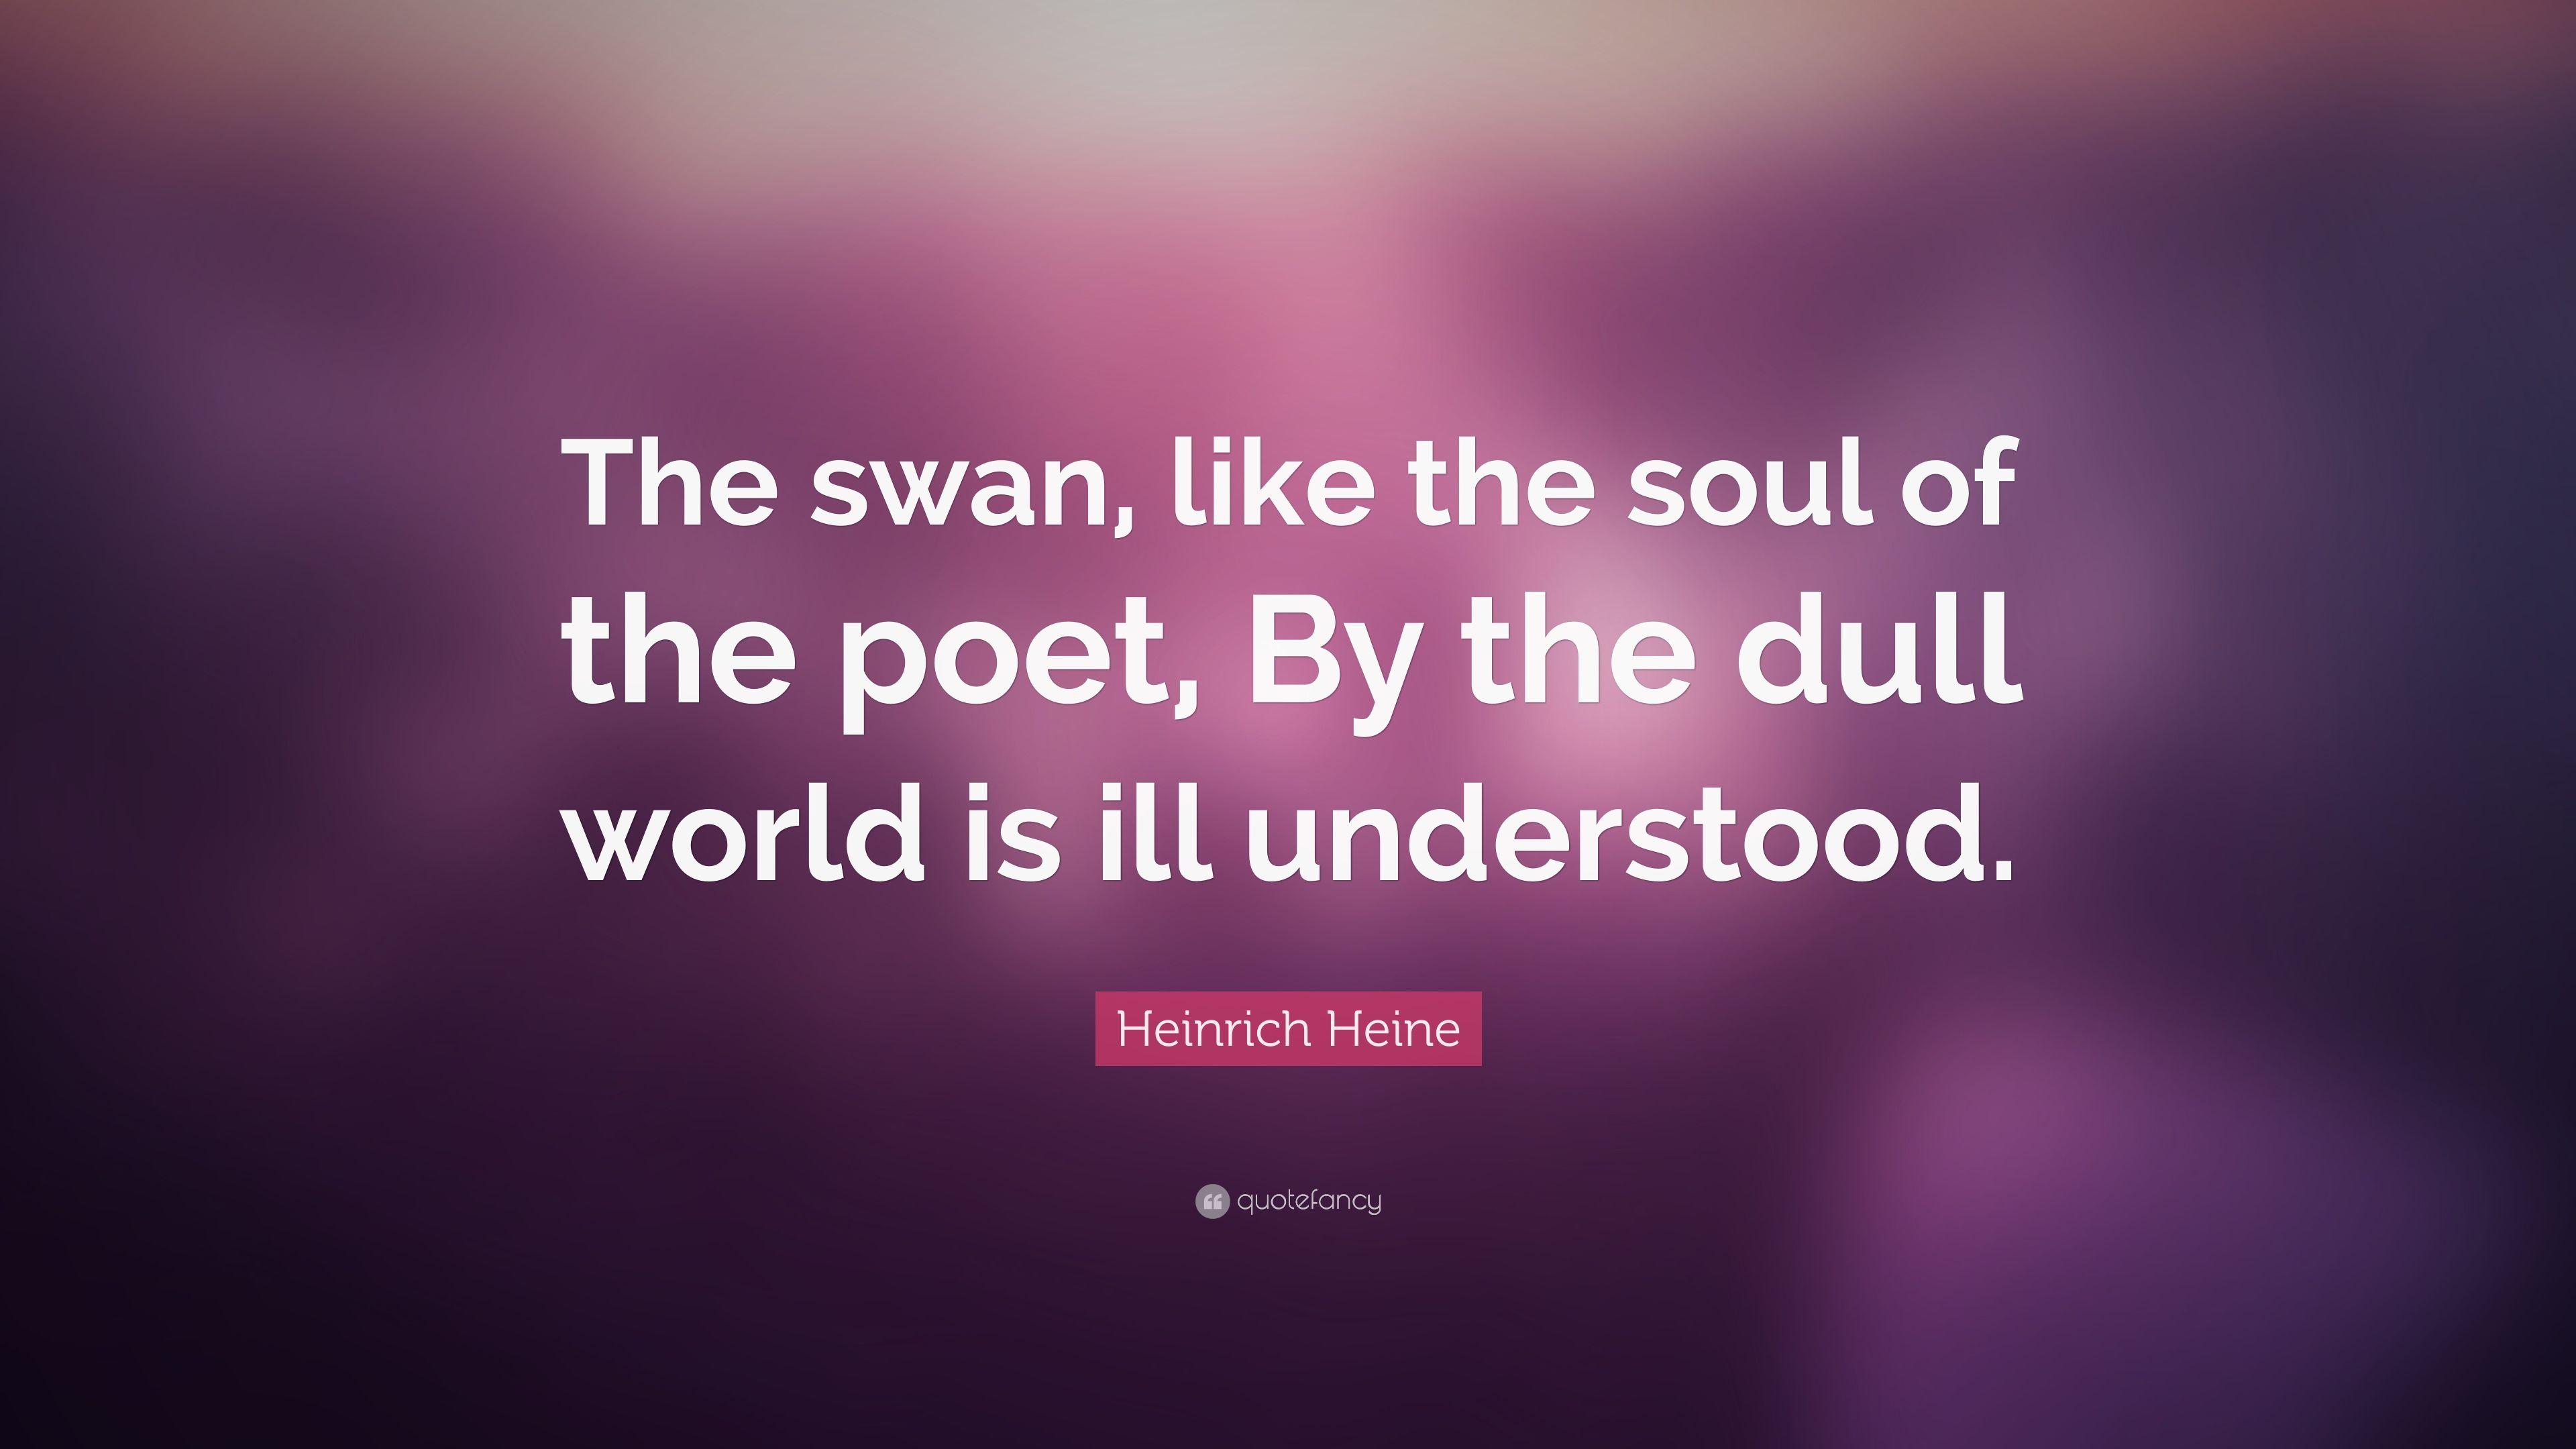 Heinrich Heine Quote: “The swan, like the soul of the poet, By